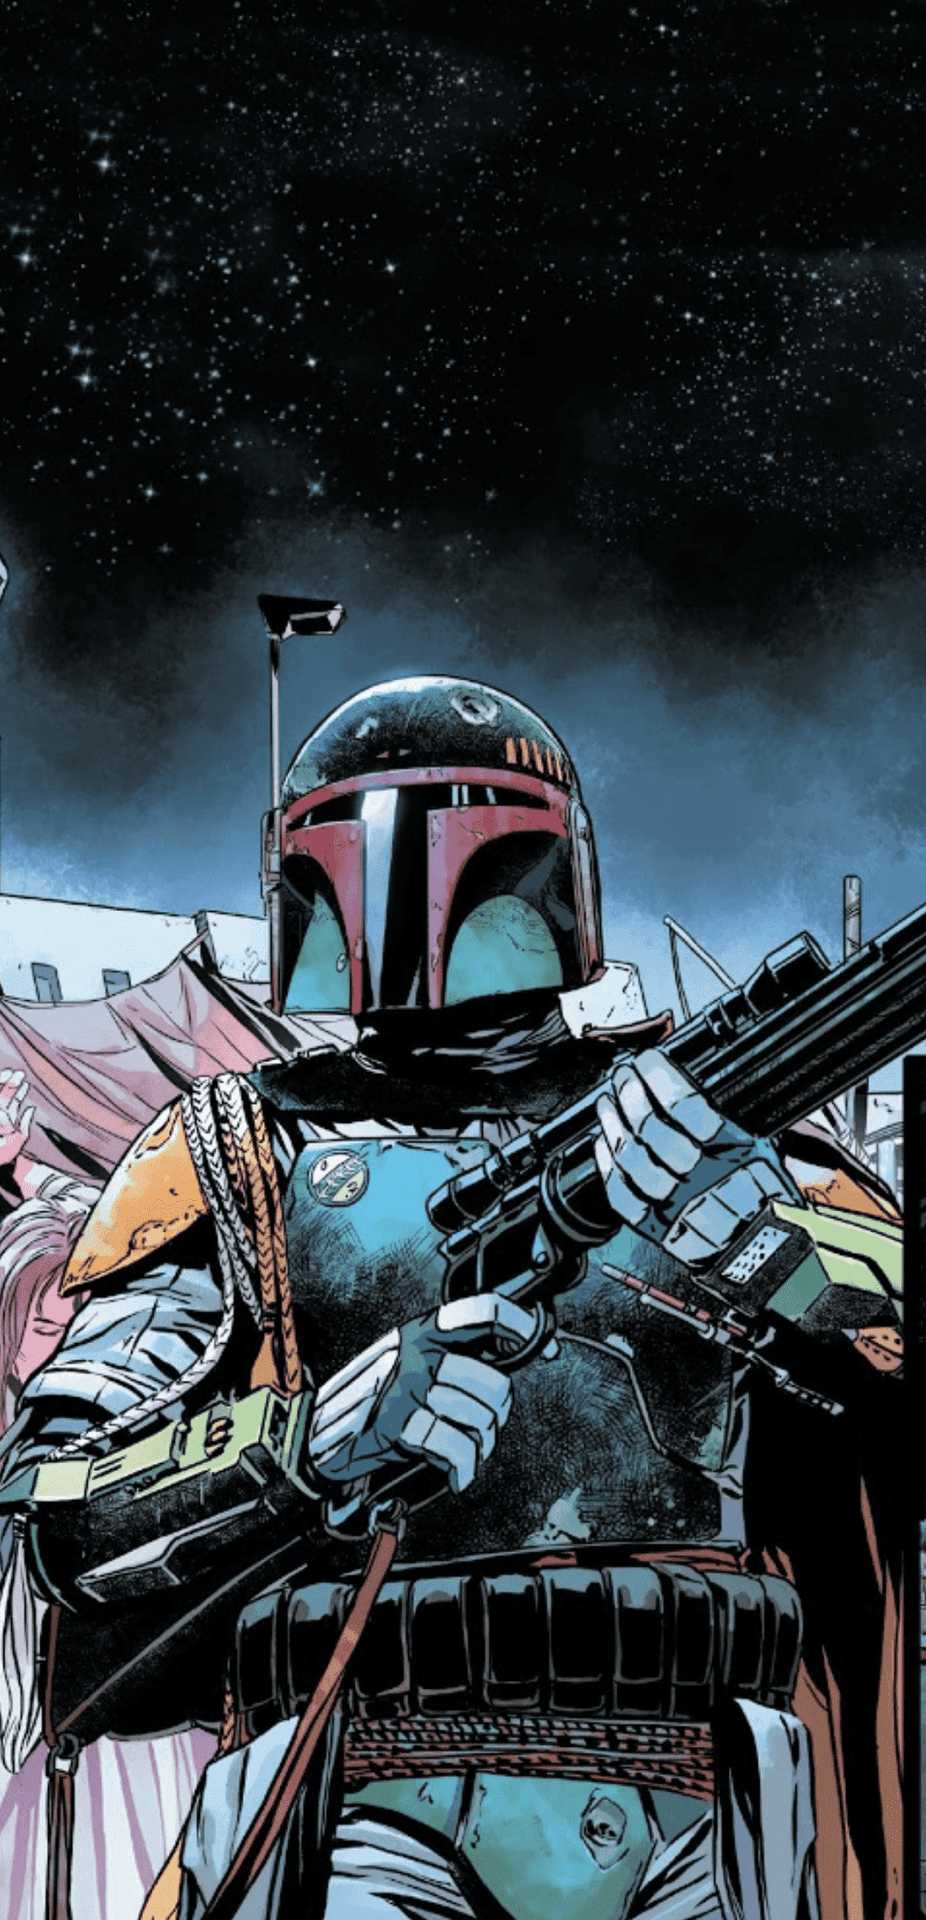 Boba Fett In Action - A Detailed Display Of Iconic Star Wars Bounty Hunter